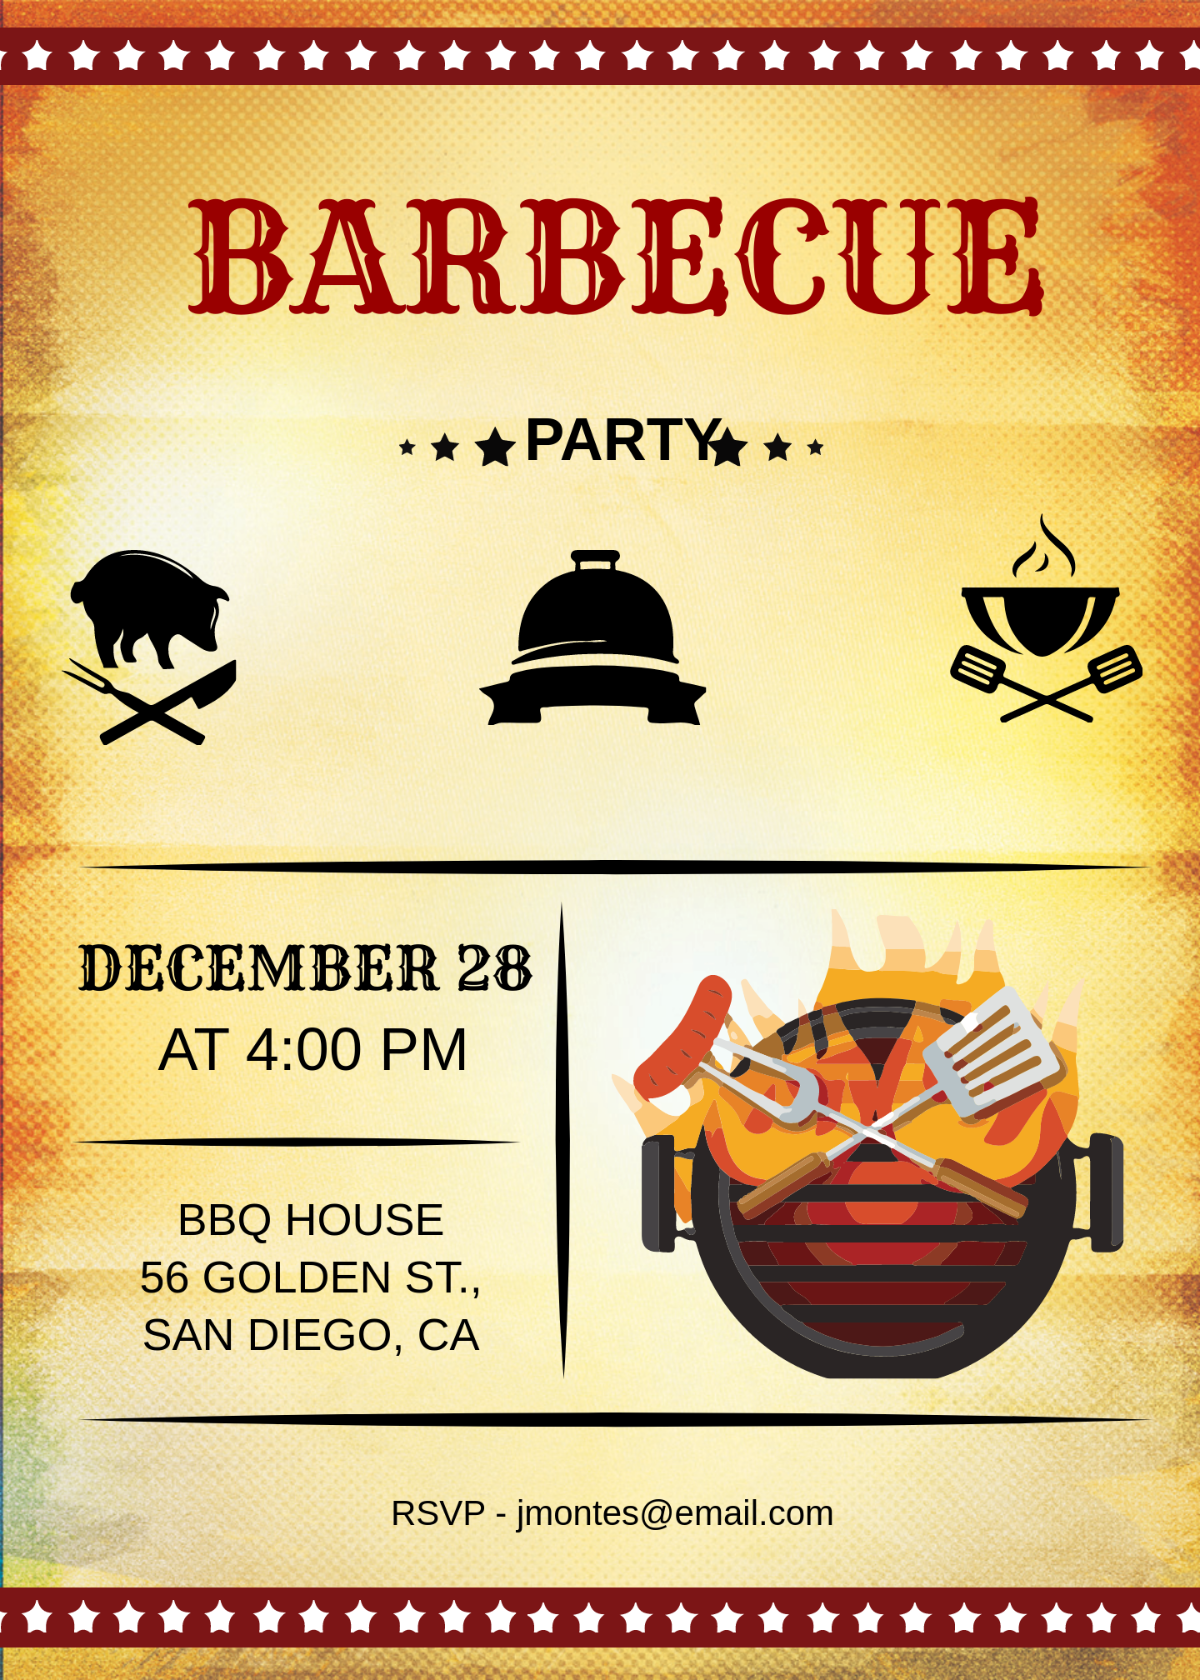 Sample BBQ Party Invitation Template